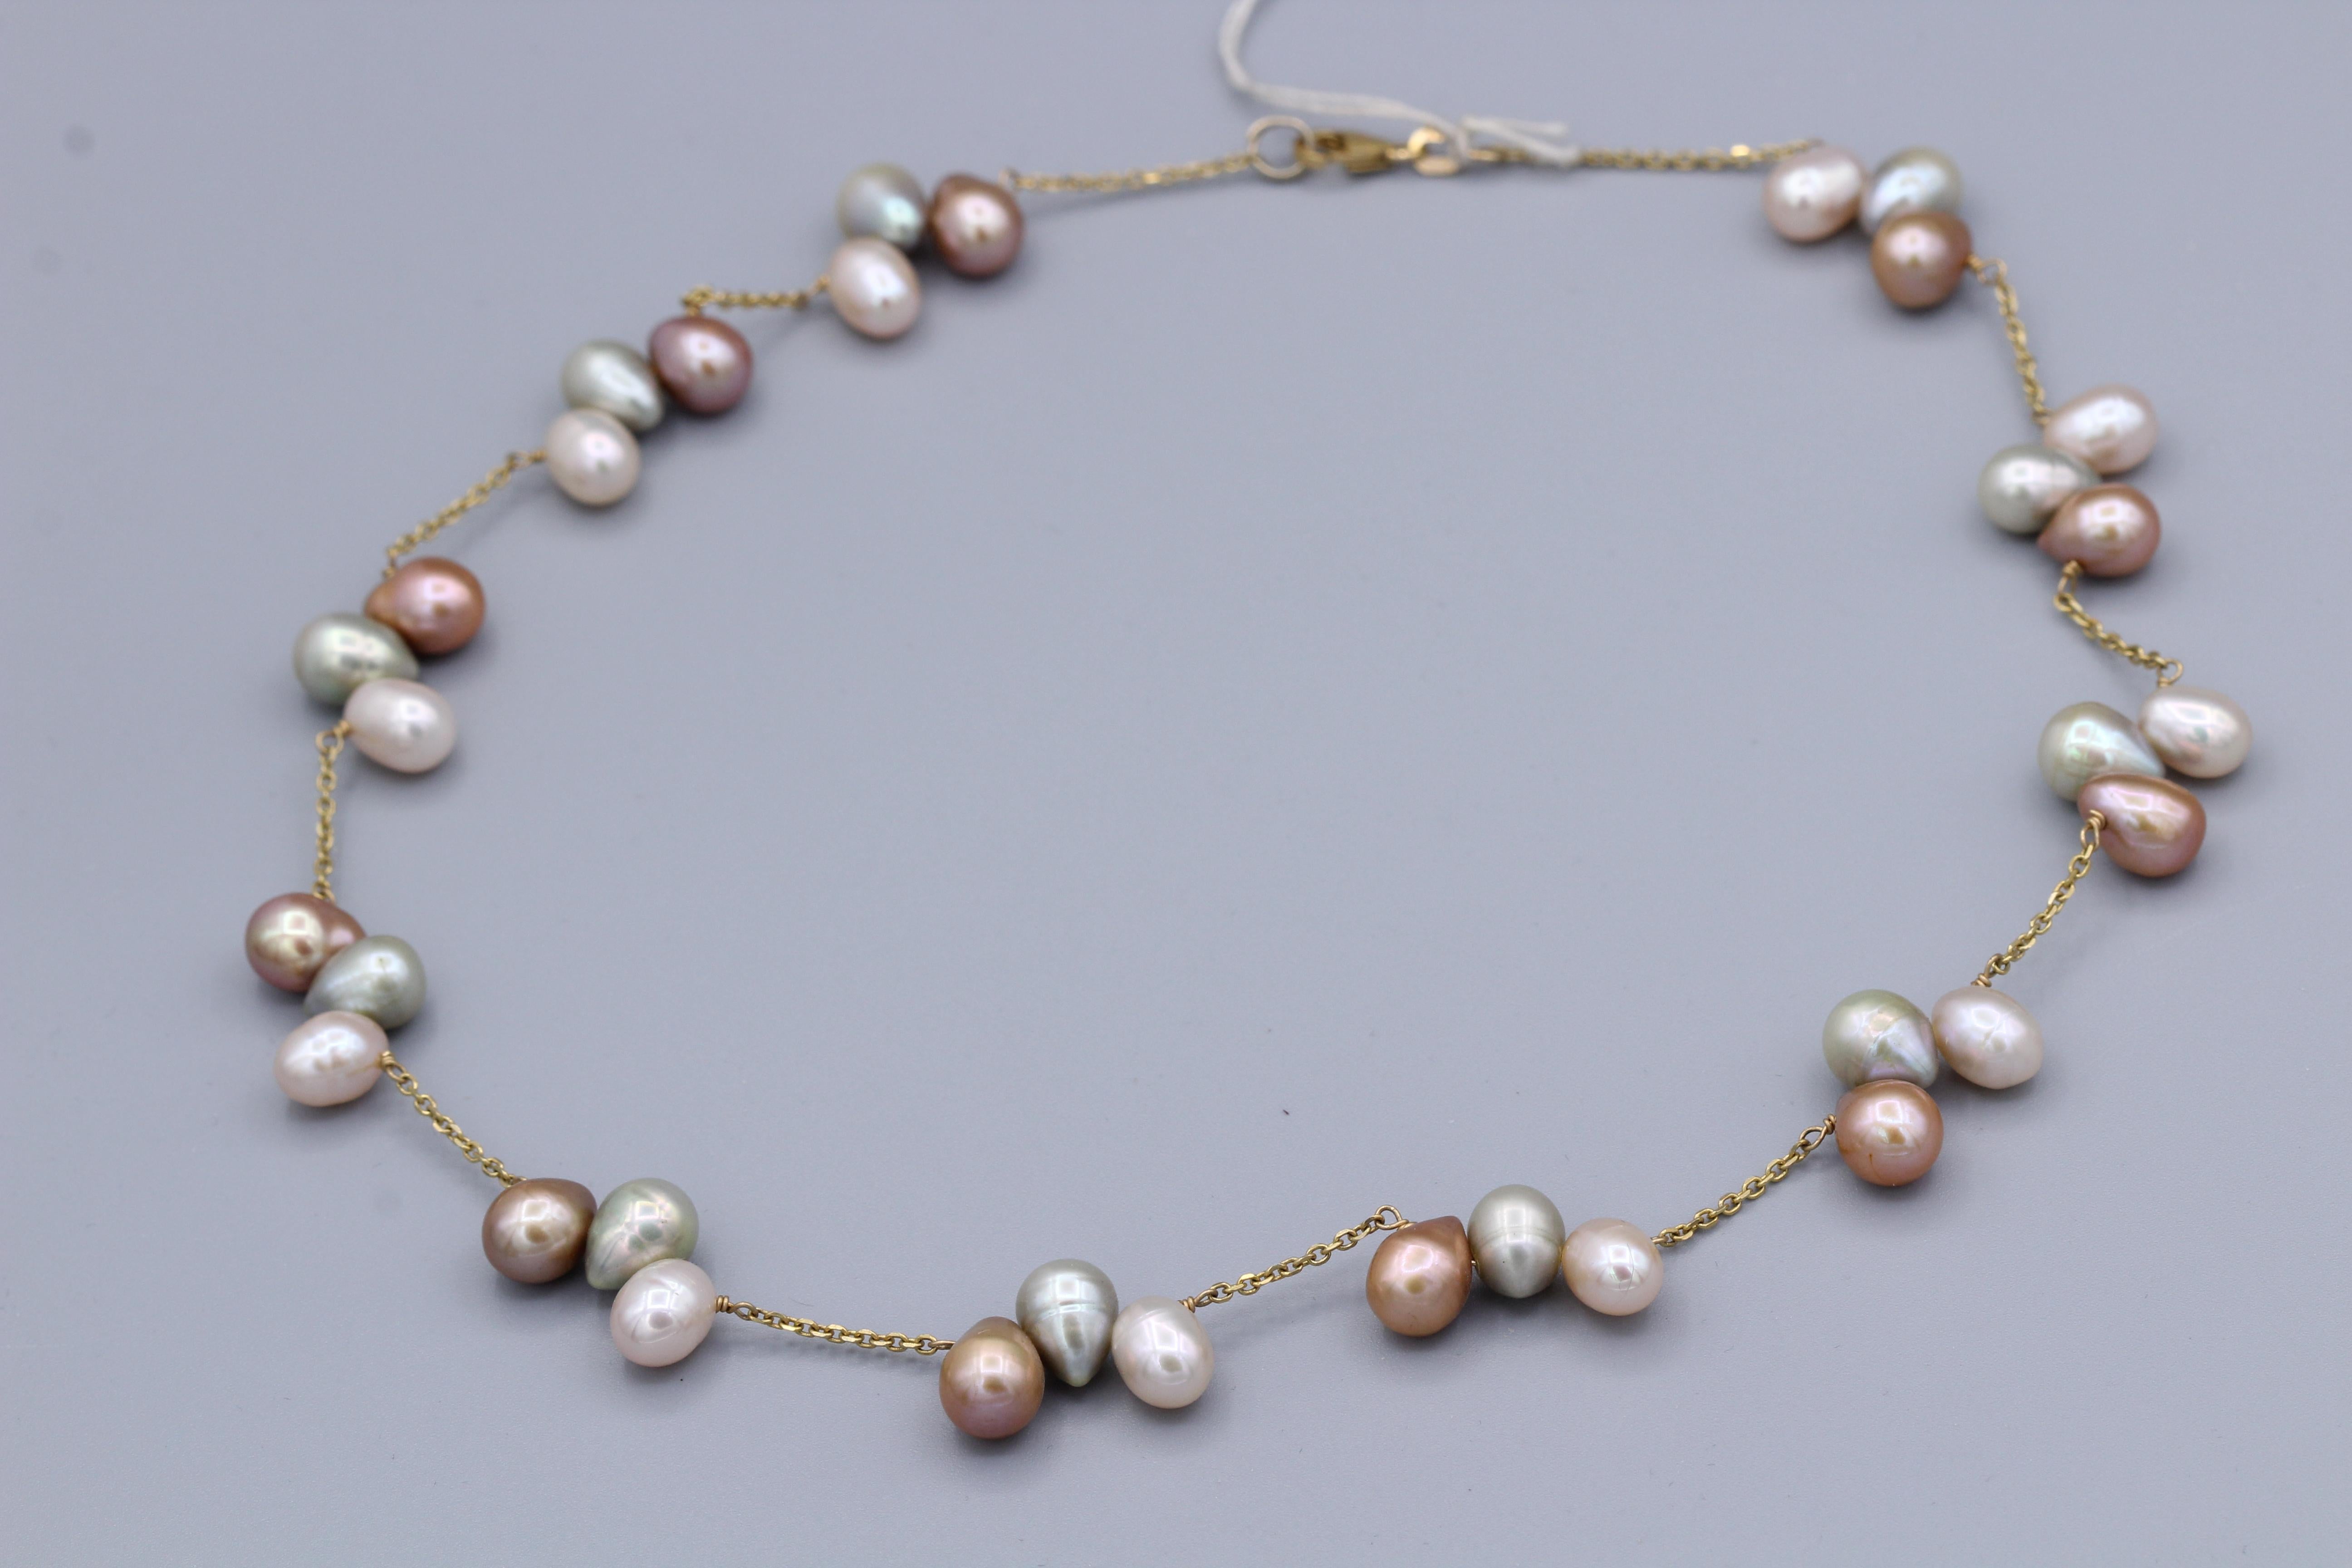 Elegant Pearl Necklace with multi-color pearls
14k Yellow Gold Chain wire Style
Length  16.5 ‘ Inch
Fresh water multi Colors approx. 6.0 mm
Lobster Lock 
Total Weight 22.0 grams
